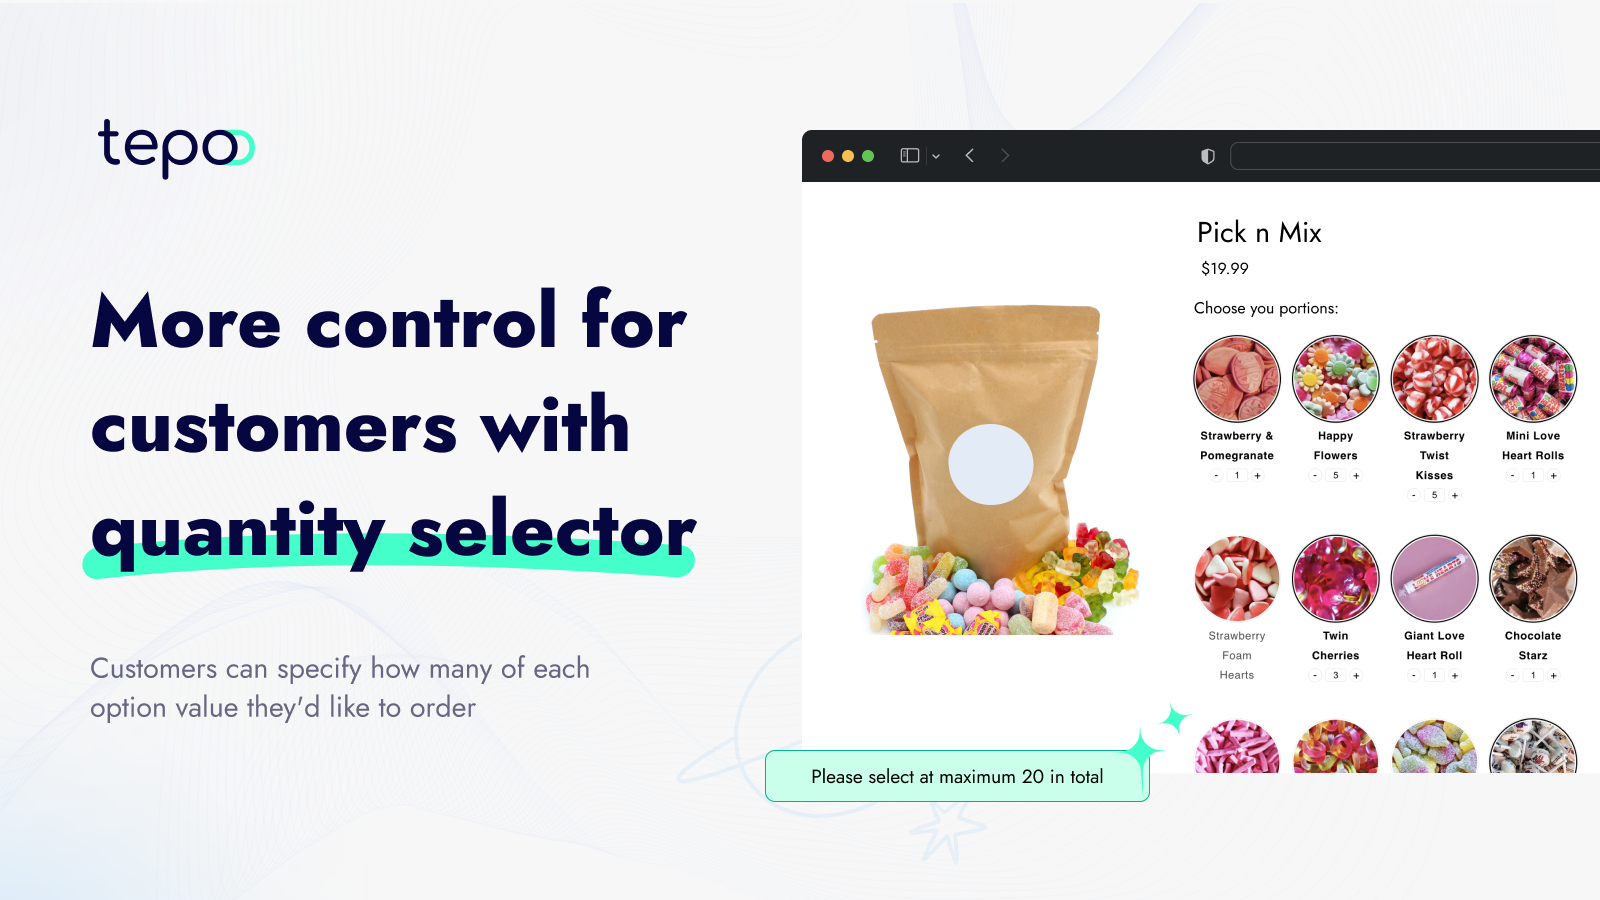 More control for customers with quantity selector